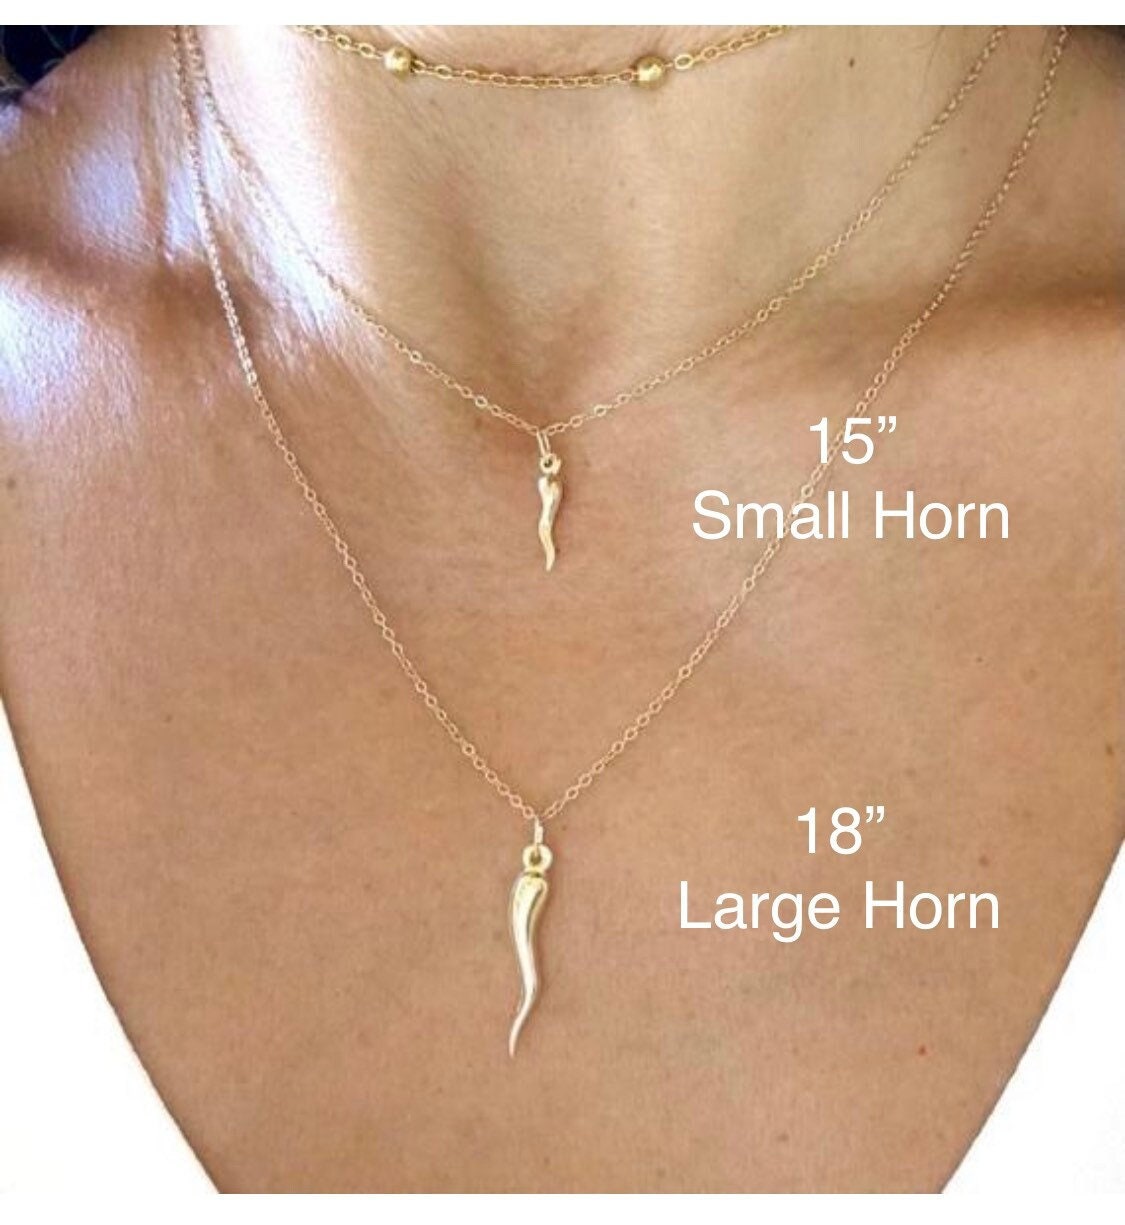 Dropship Unicorn Horn Pendant Necklace, Trendy Jewelry Gift For Birthday  Graduation Christmas, Clothing Accessories For Men to Sell Online at a  Lower Price